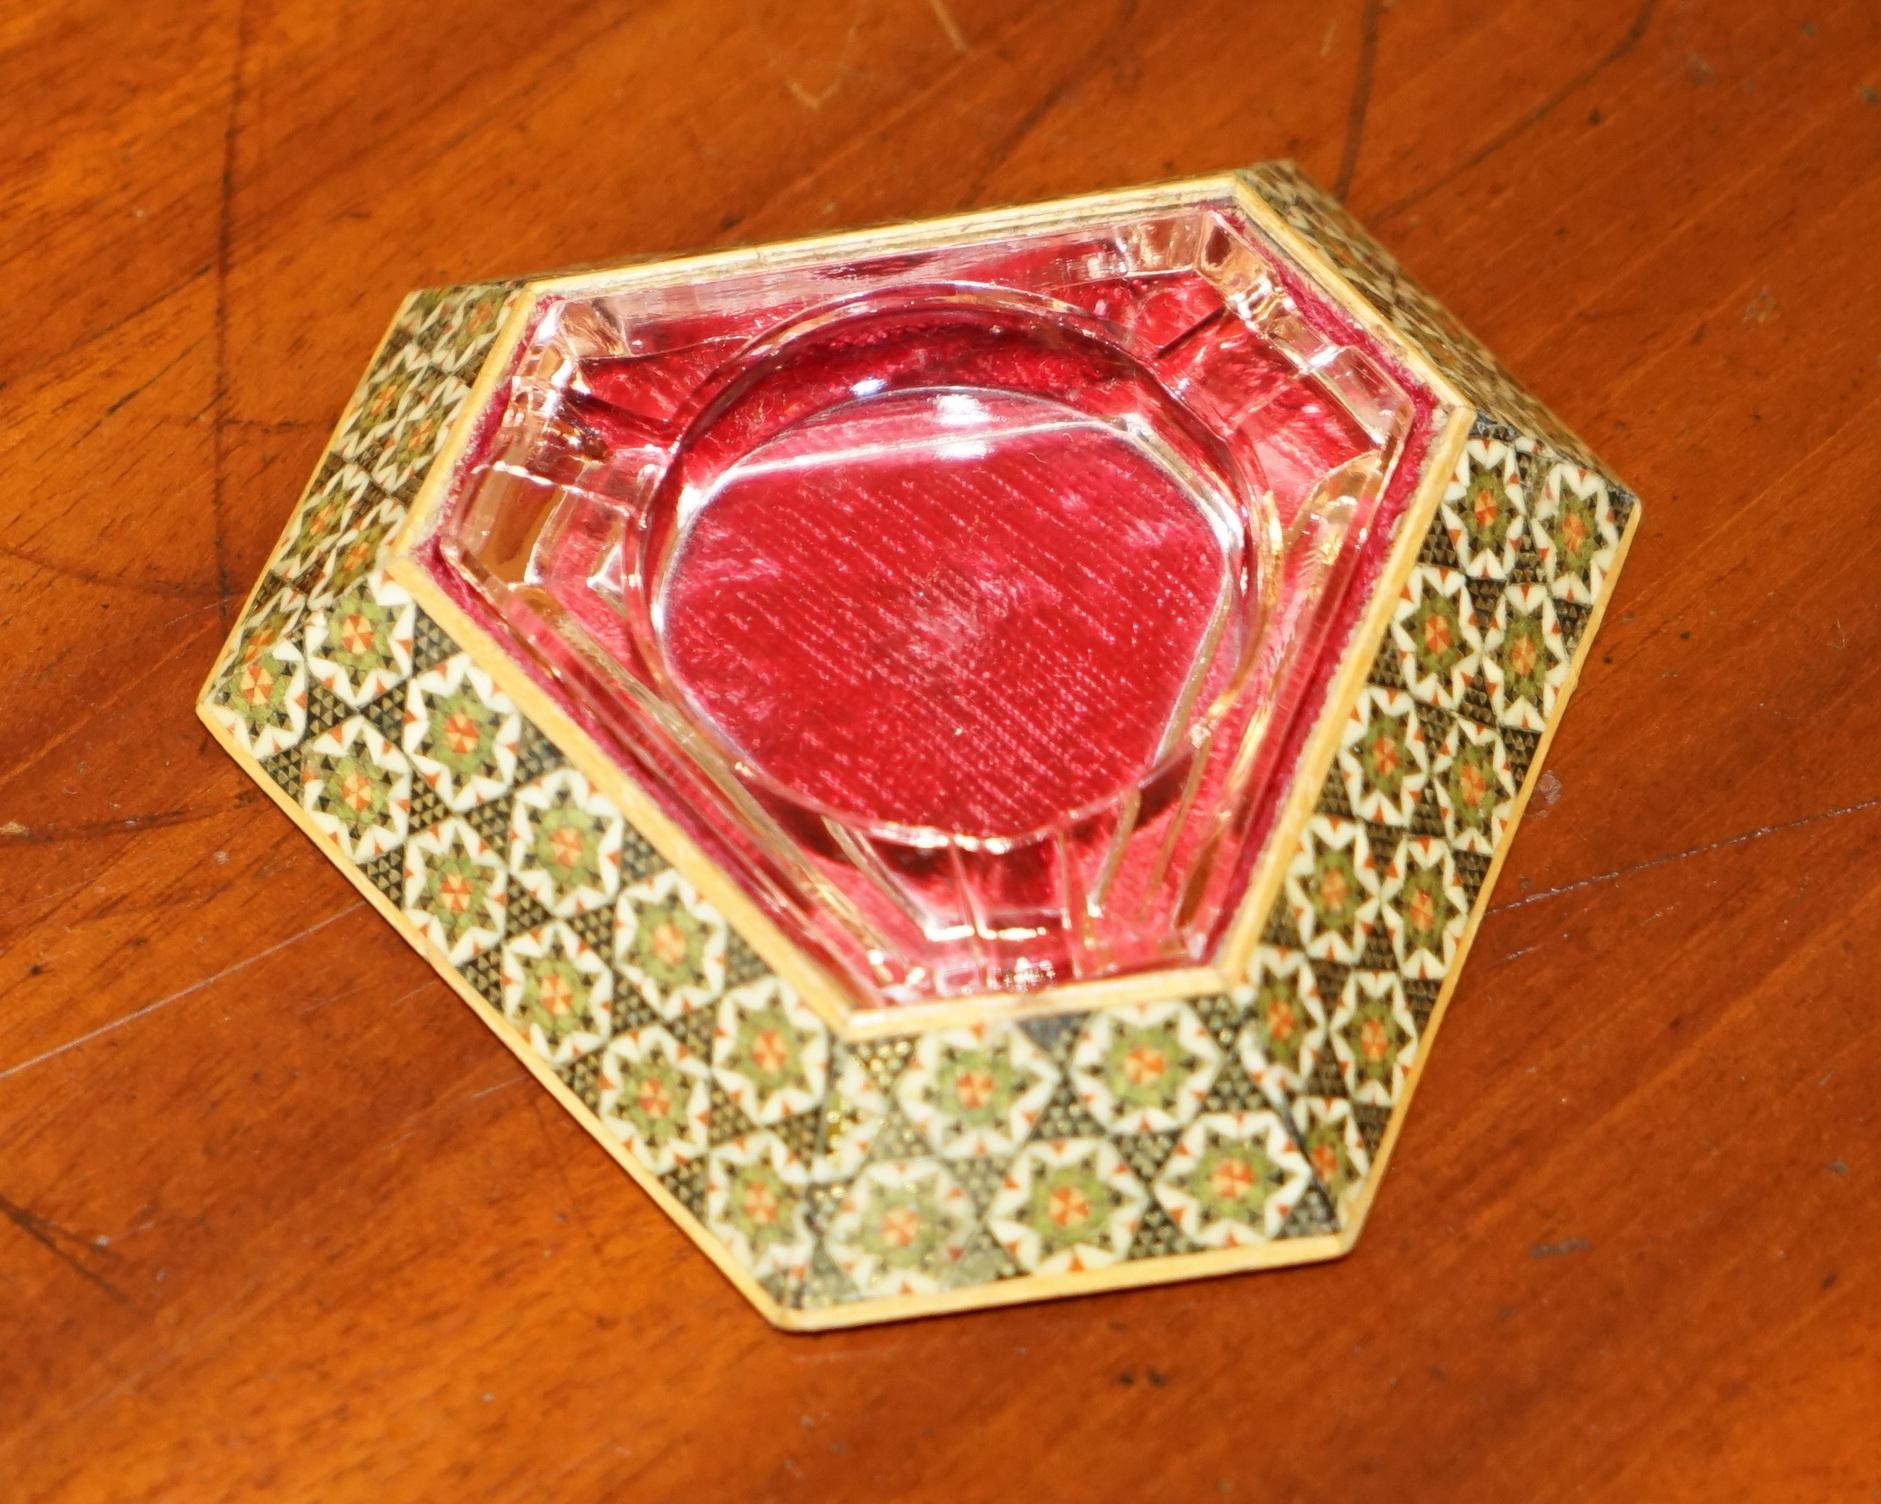 Royal House Antiques

Royal House Antiques is delighted to offer for sale this lovely, super decorative antique Persian Oriental Ashtray with lovely Cranberry glass internal tray

A wonderfully original find, this isn’t one of the much later